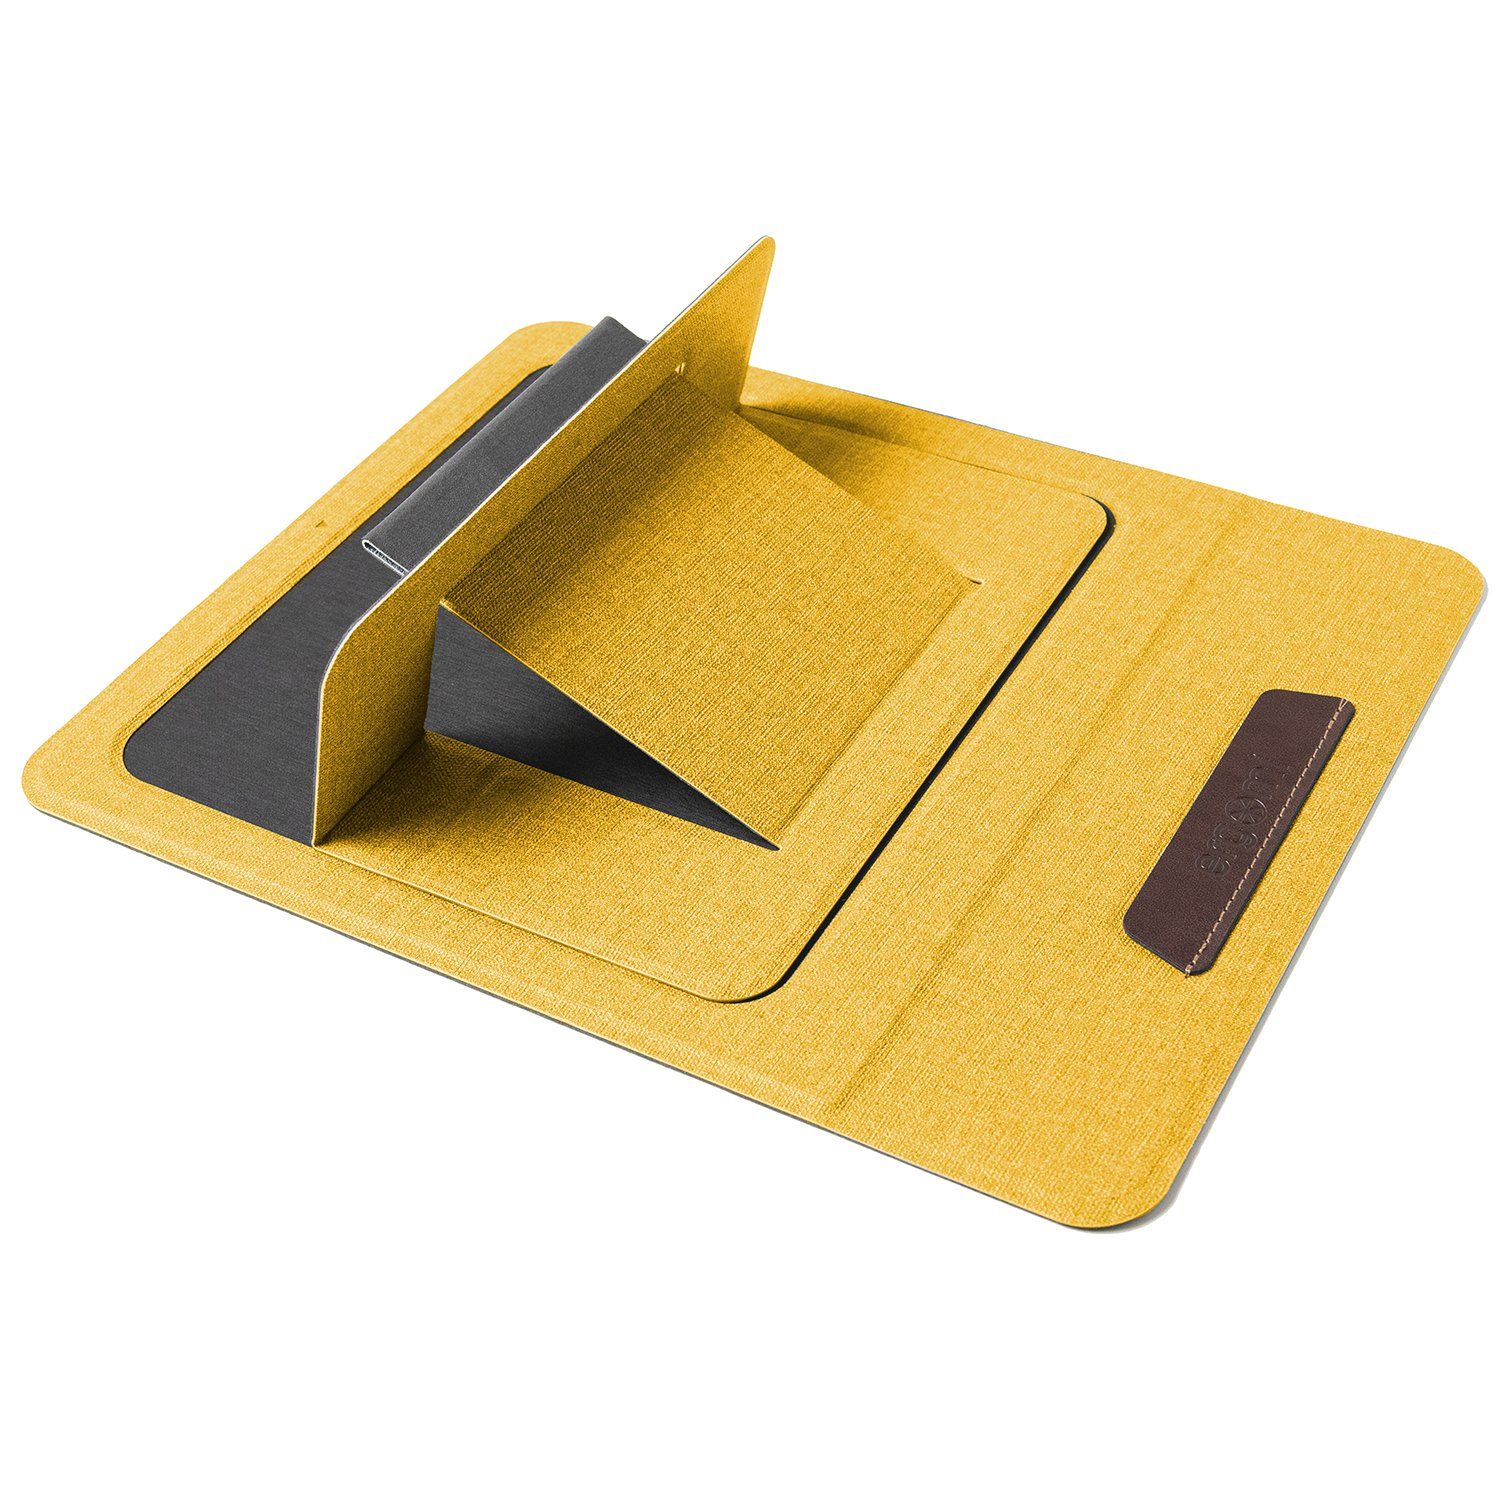 Ergomi Meta Pro Portable & Foldable Laptop Stand Paper-Thin Higher Angle for Laptop Tablet Mouse Pad Default Ergomi Sands Yellow 